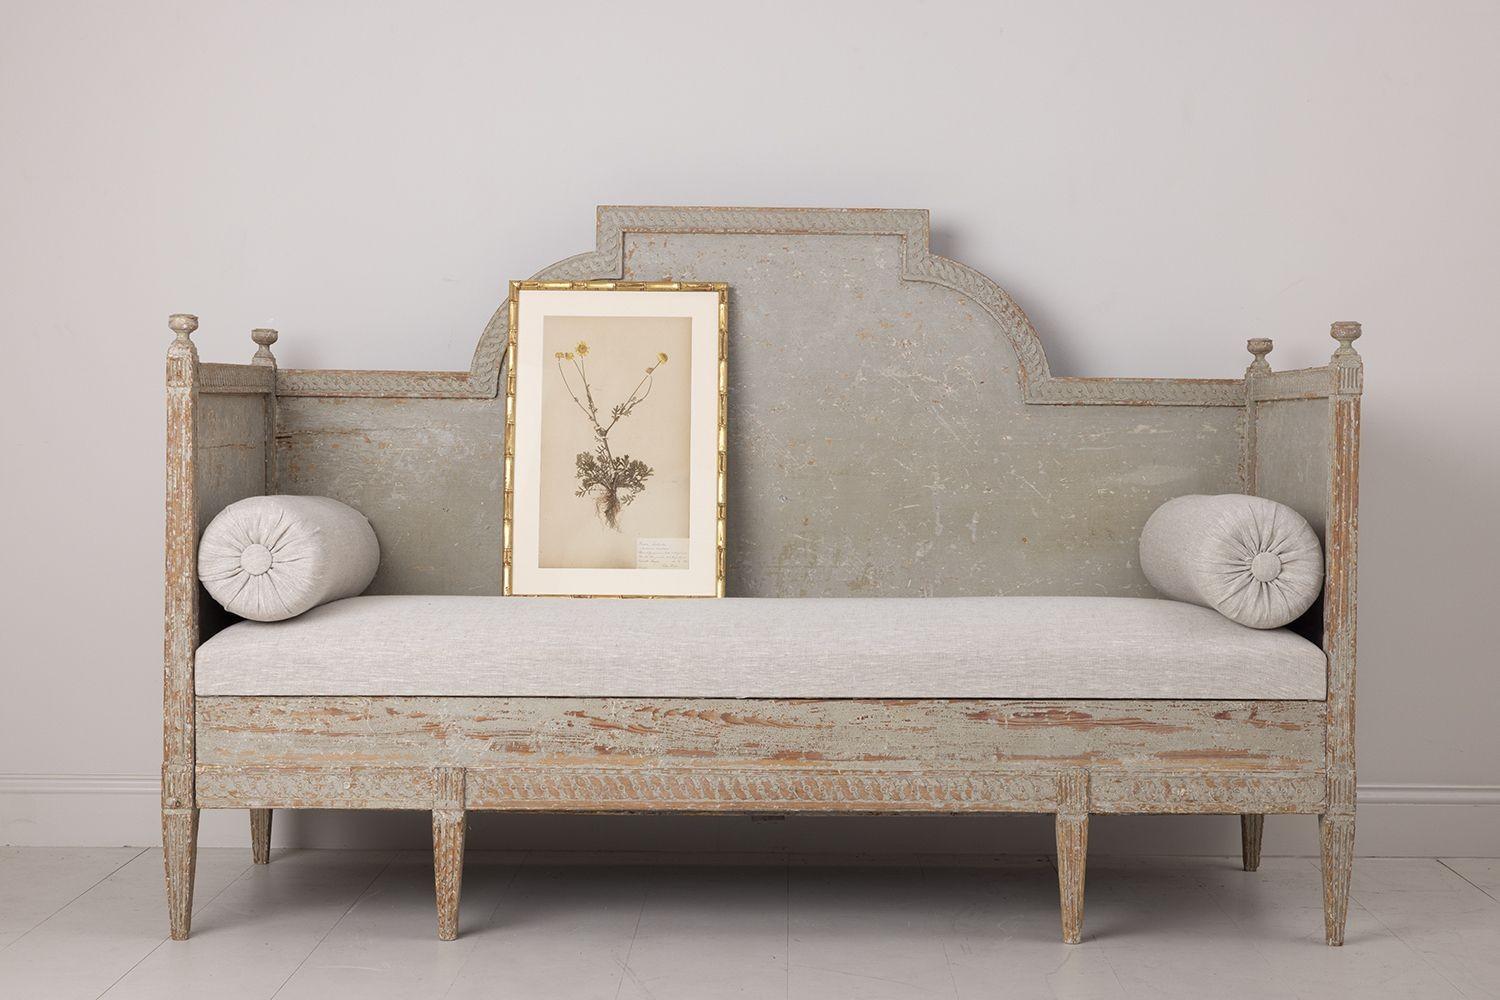 A Swedish daybed sofa from the Gustavian period dry-scraped to reveal the original paint and newly upholstered in linen with side bolster pillows. This sofa or banquette is beautifully hand carved with a guilloché detail around the back and seat